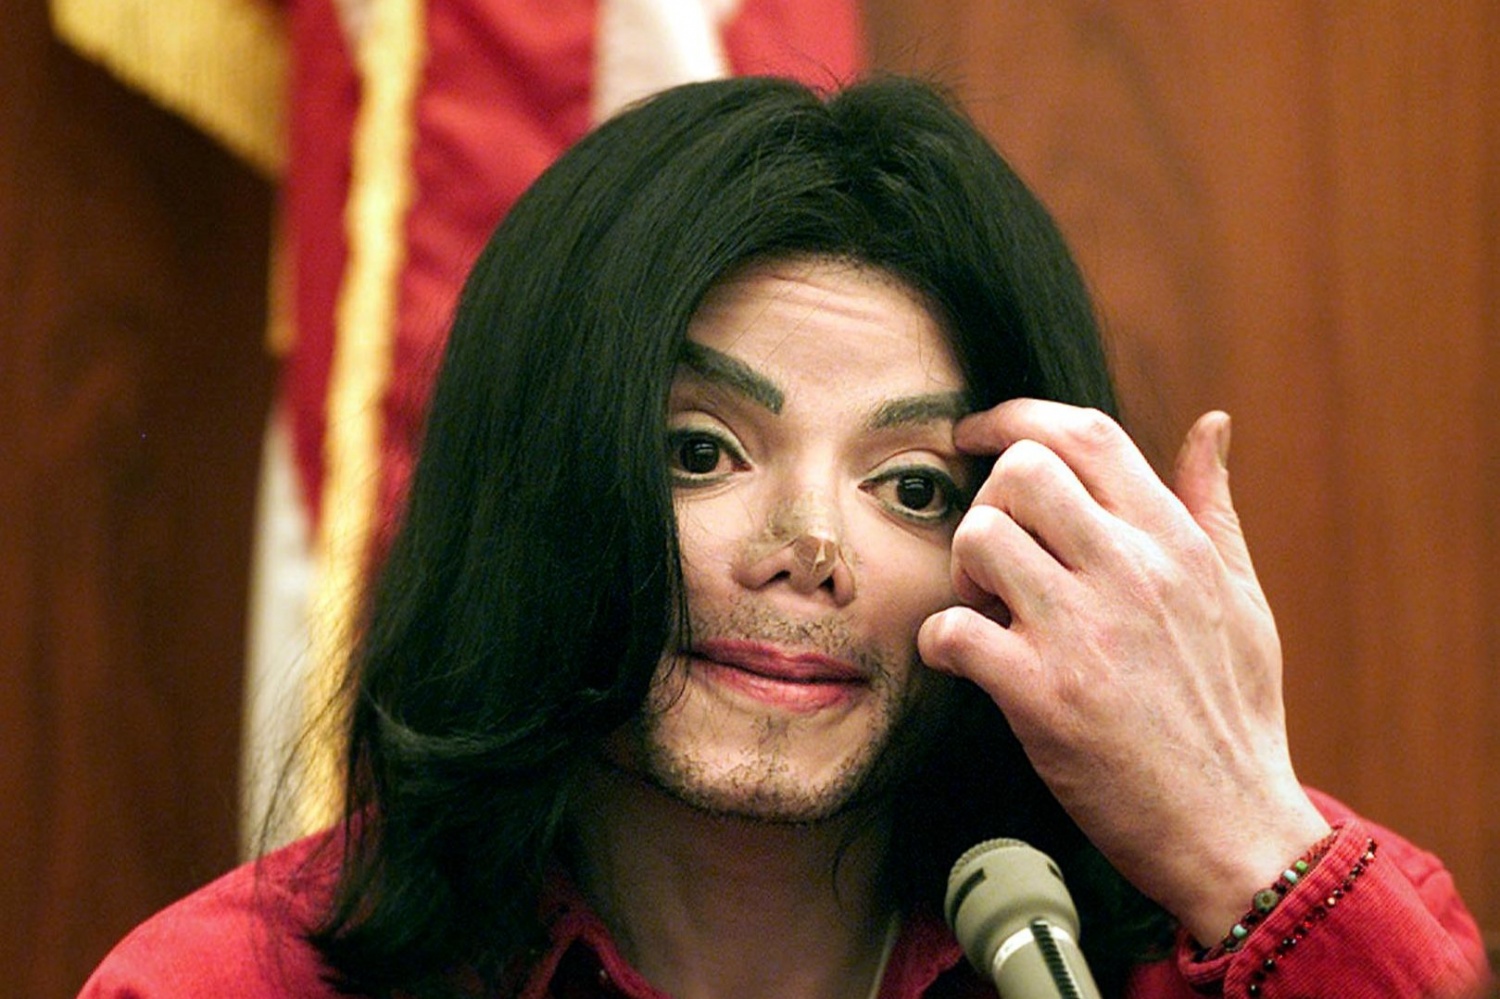 Michael Jackson’s real voice described by PR expert after report revealed his ‘fake’ high pitch